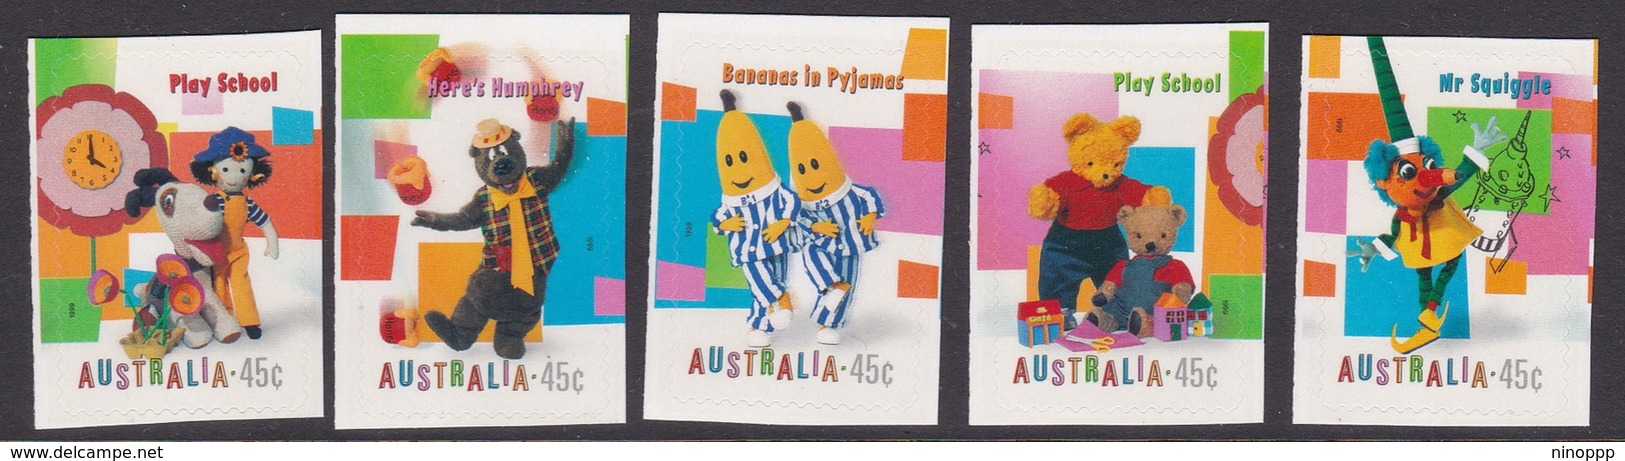 Australia ASC 1743c-1747c 1999 Children's TV, From Booklet, Mint Never Hinged - Mint Stamps